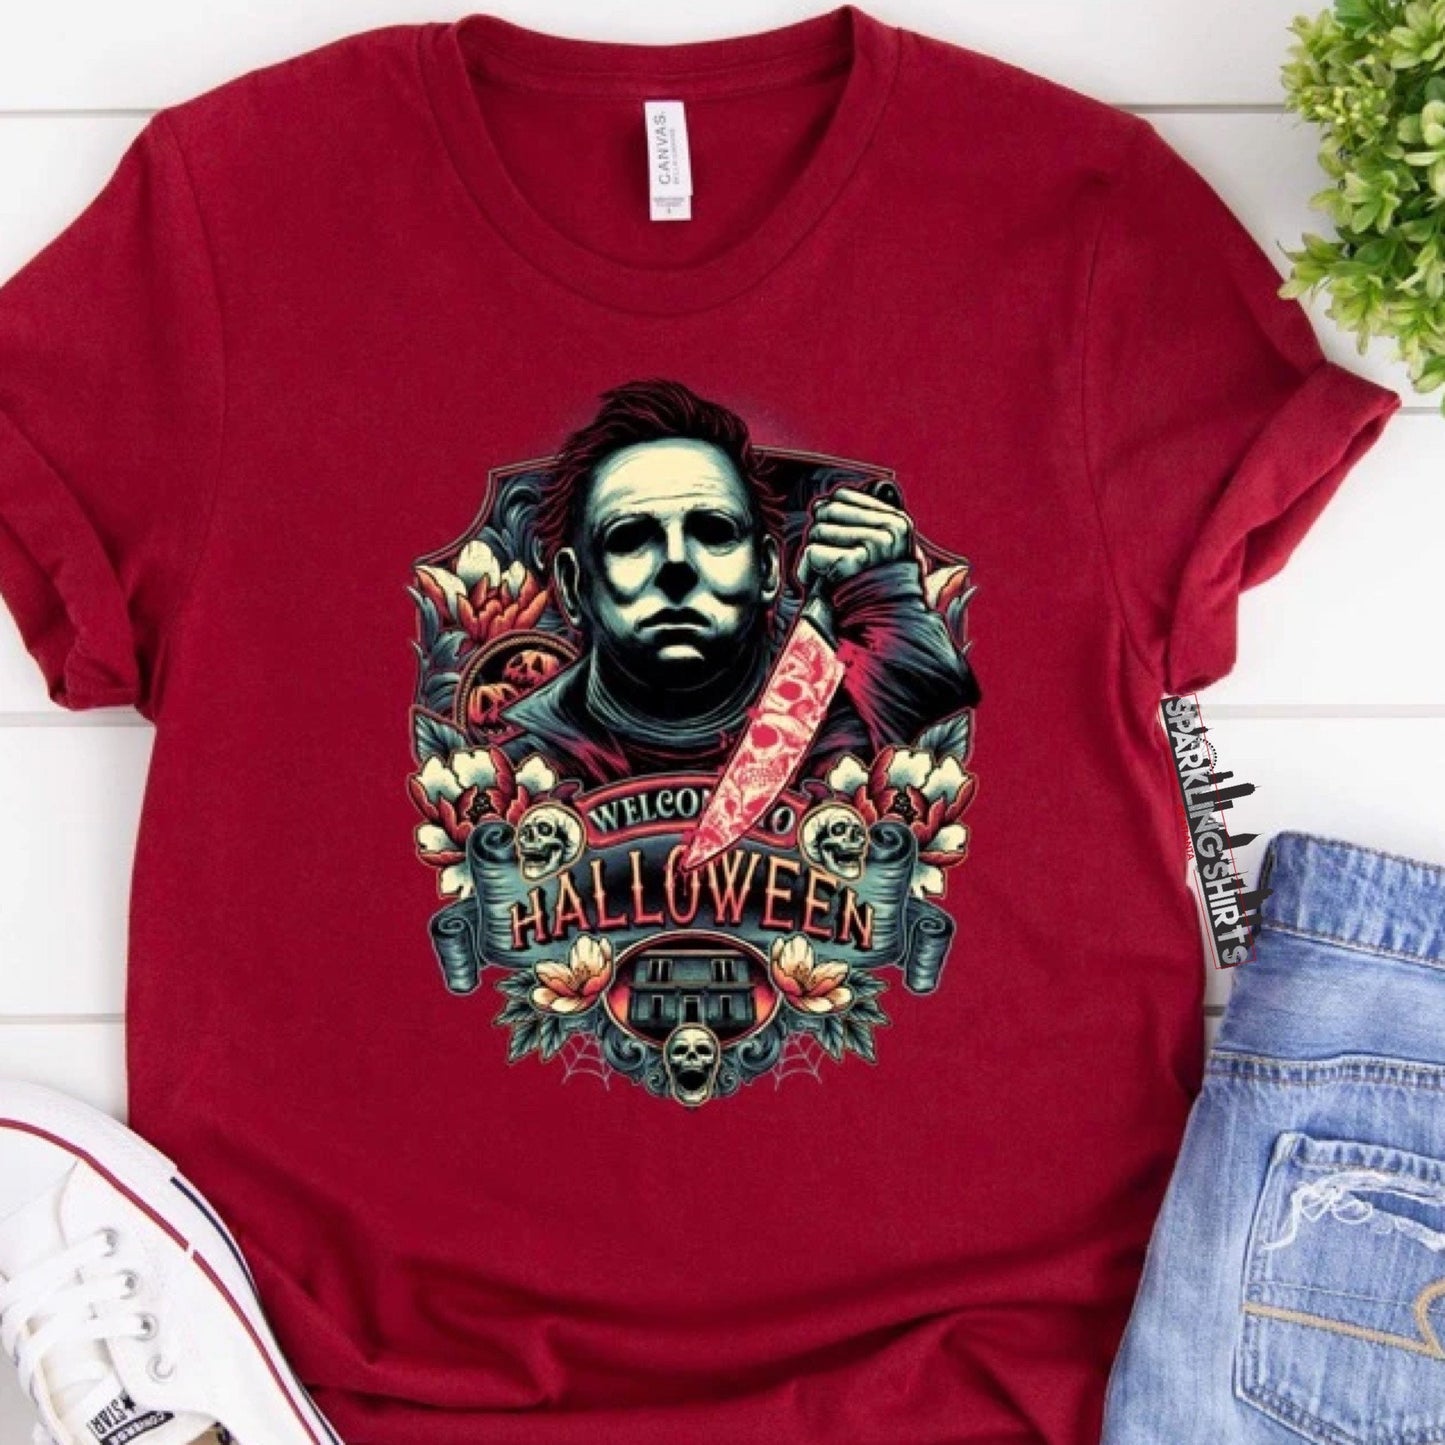 Halloween 2| Michael Myers| Horror| Scary| Everyday| Graphic T-shirt